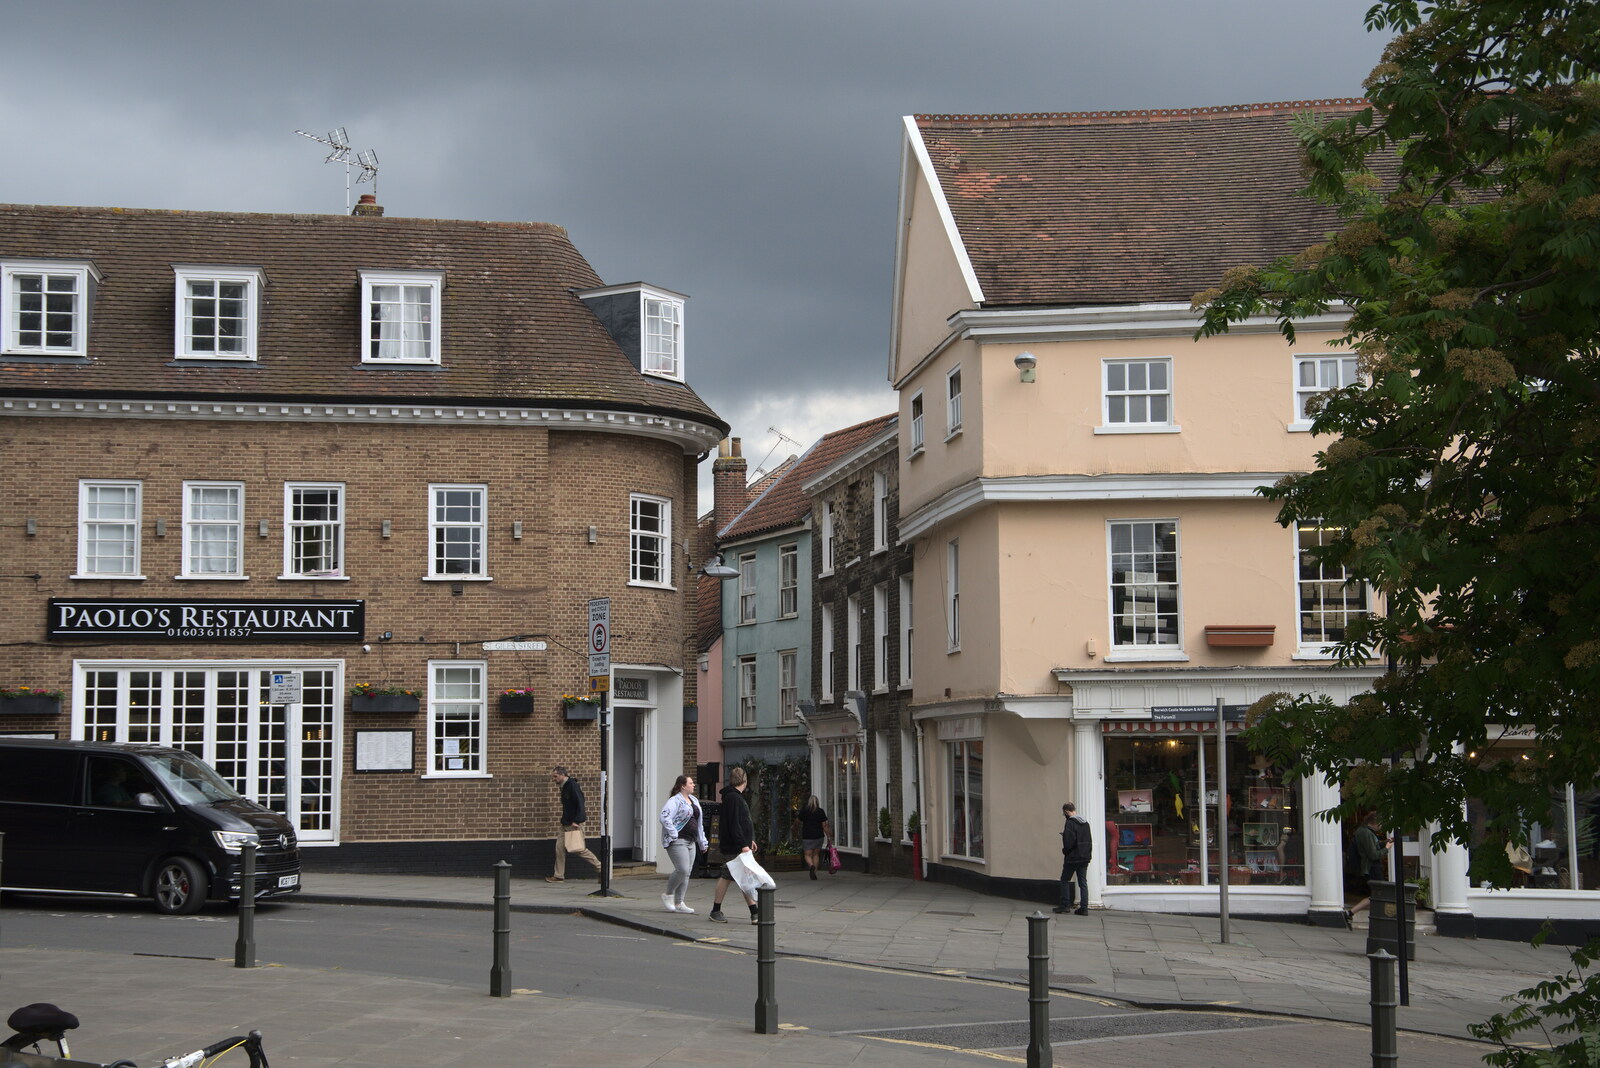 Skies darken behind Lower Goat Lane from Discovering the Hidden City: Norwich, Norfolk - 23rd May 2022